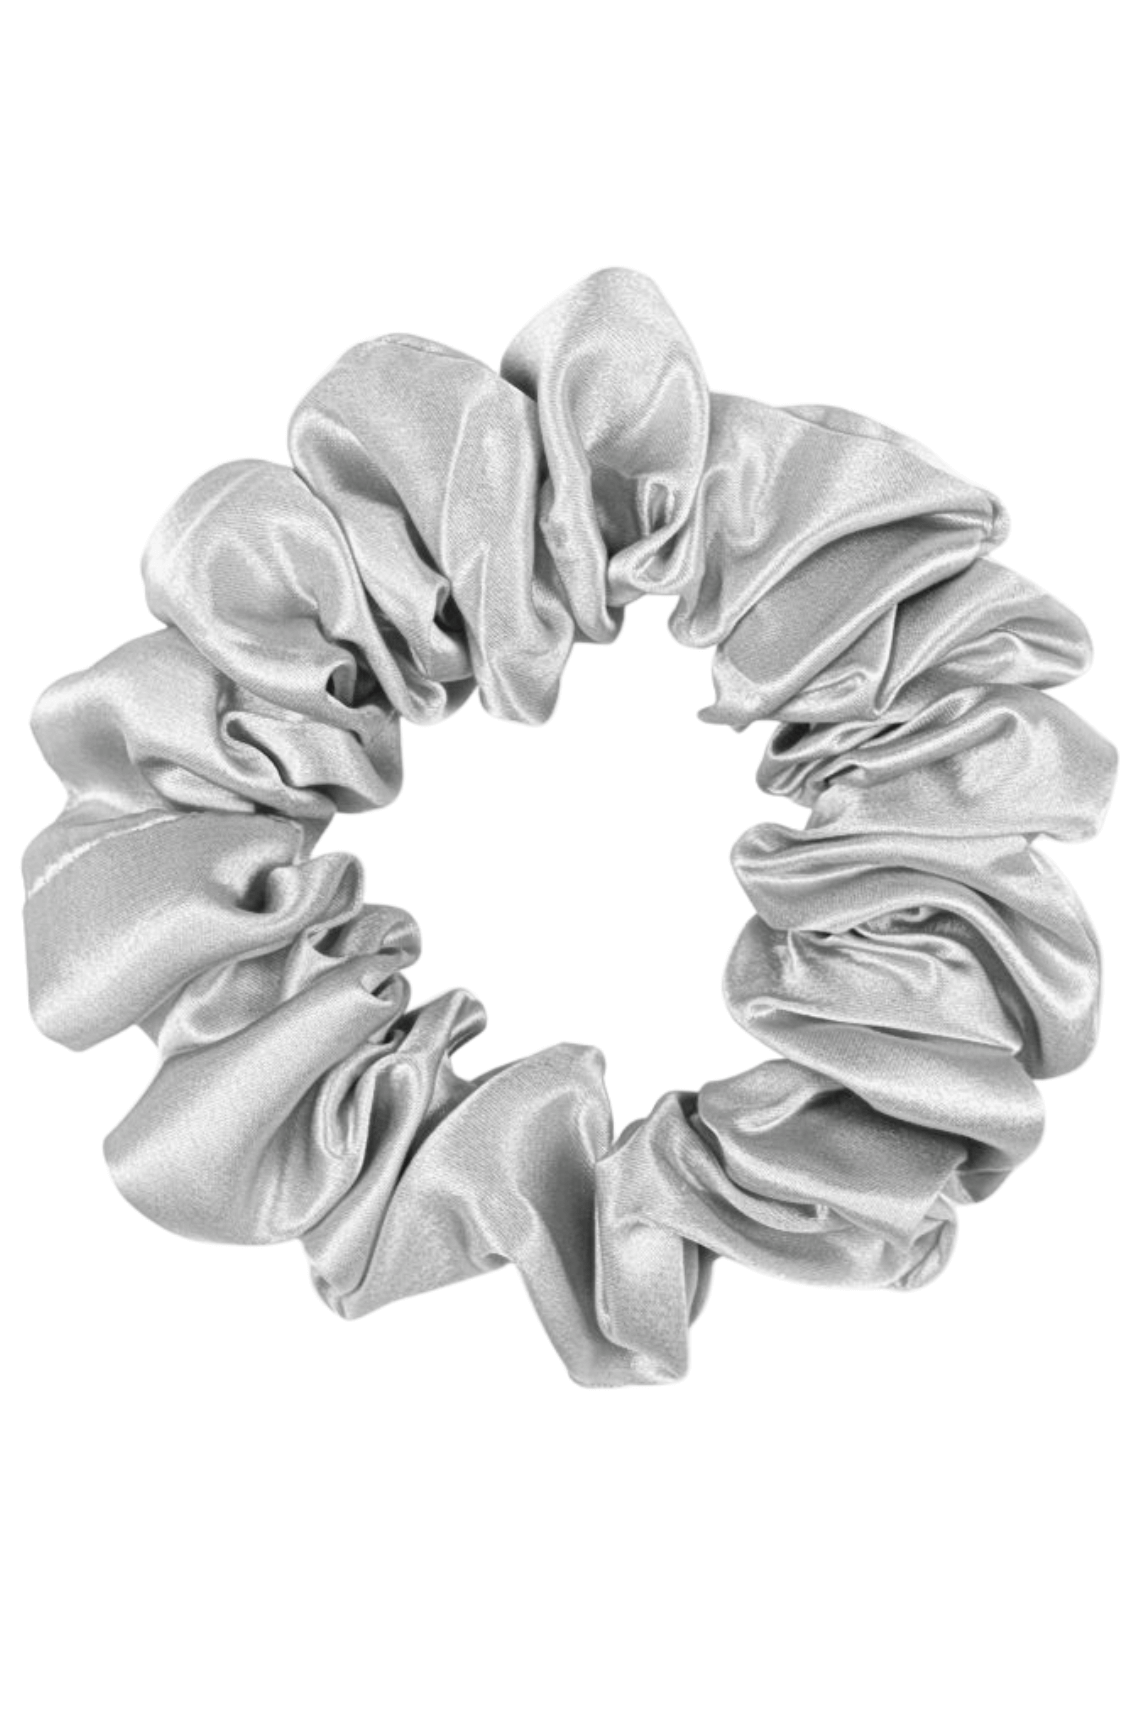 LARGE Silk Scrunchies Set - Midnight (Pack of 3) - BASK™